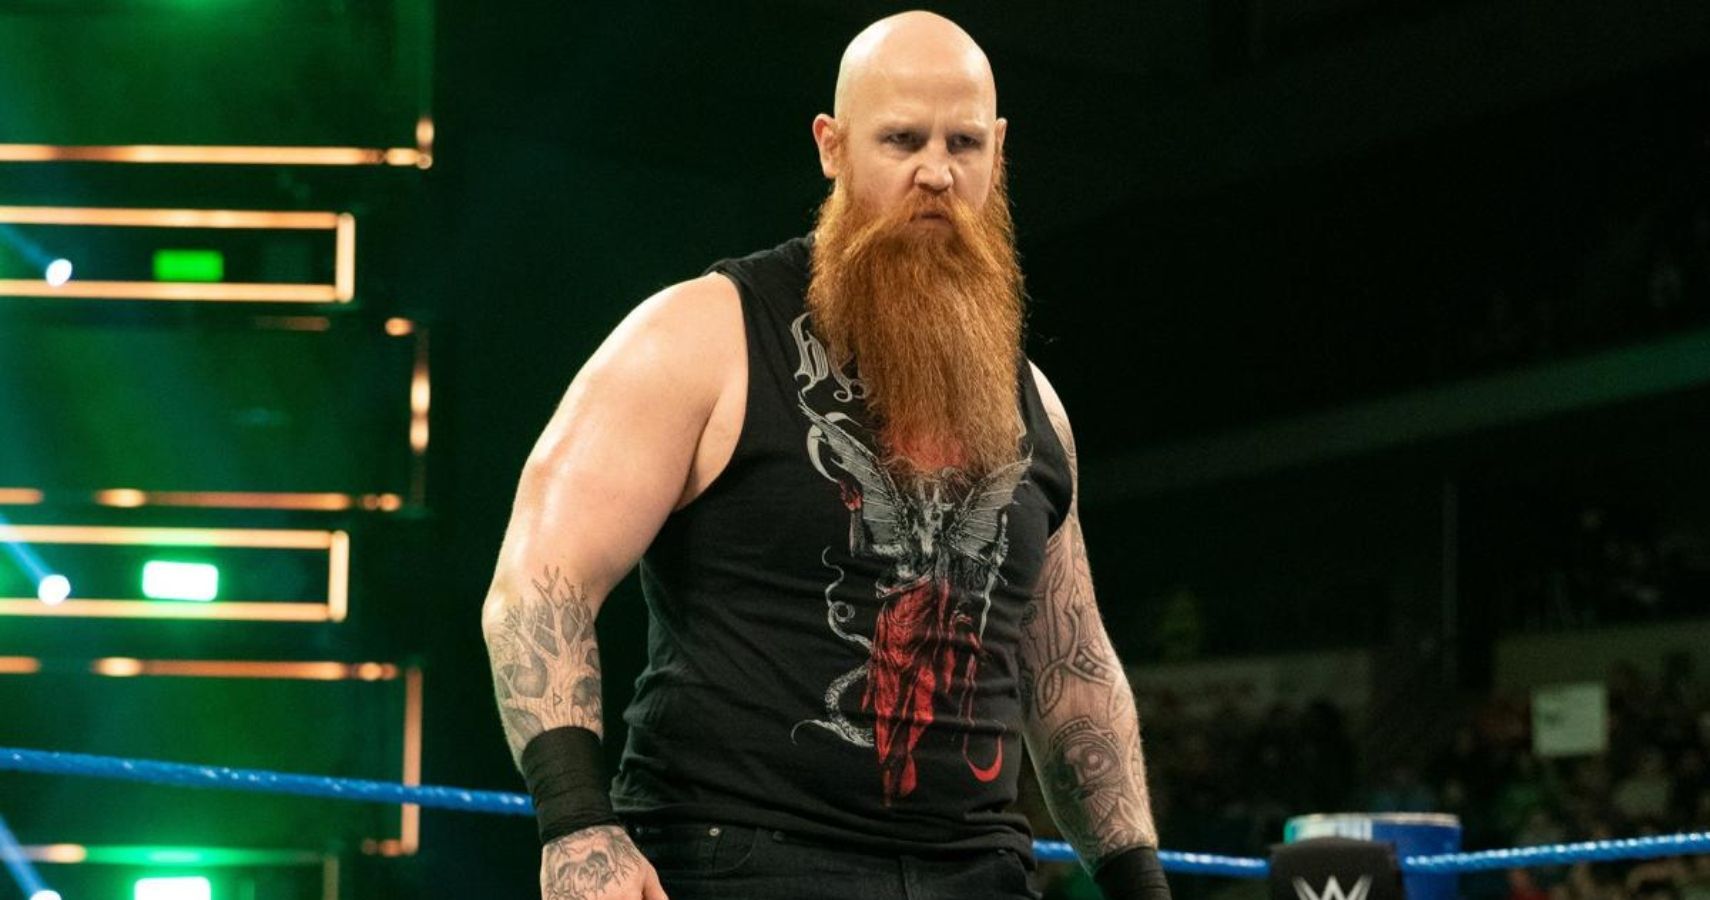 Update On Erick Rowan's Potential Contract Status With AEW